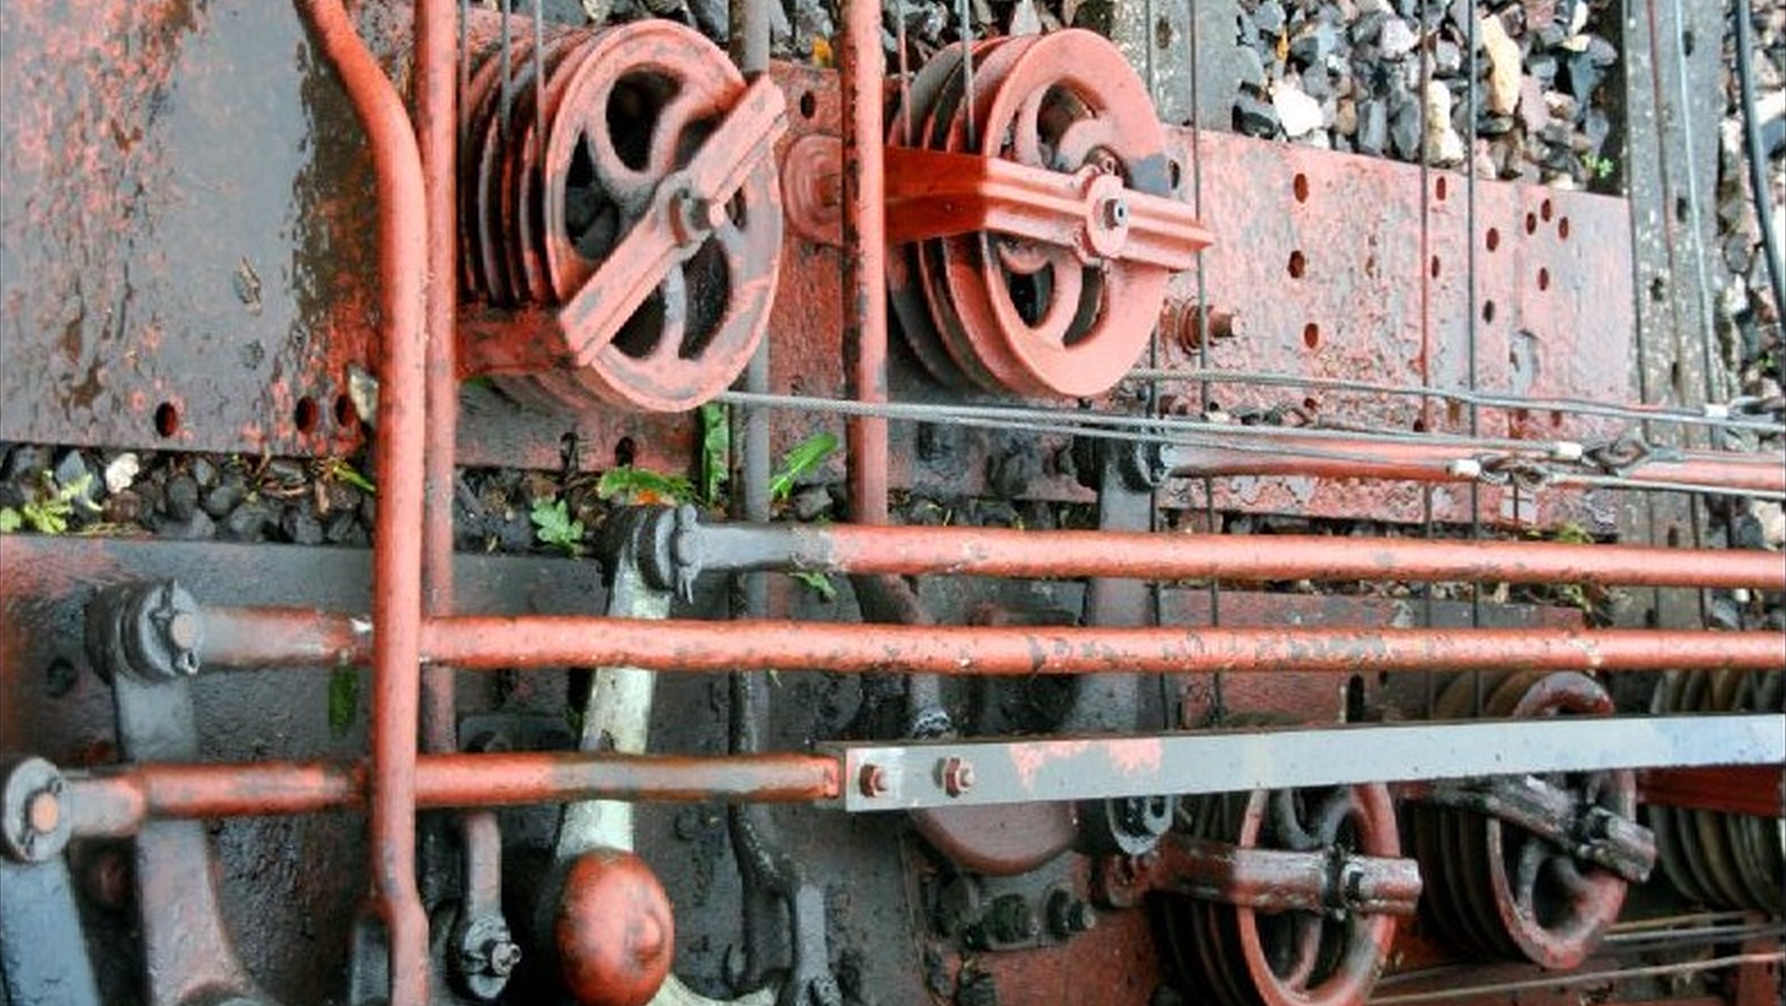 group of wheels, pulleys, levers and other rigid or semi-rigid transmission mechanisms, held together by wooden crosspieces, all placed on the ground on a bed of stones